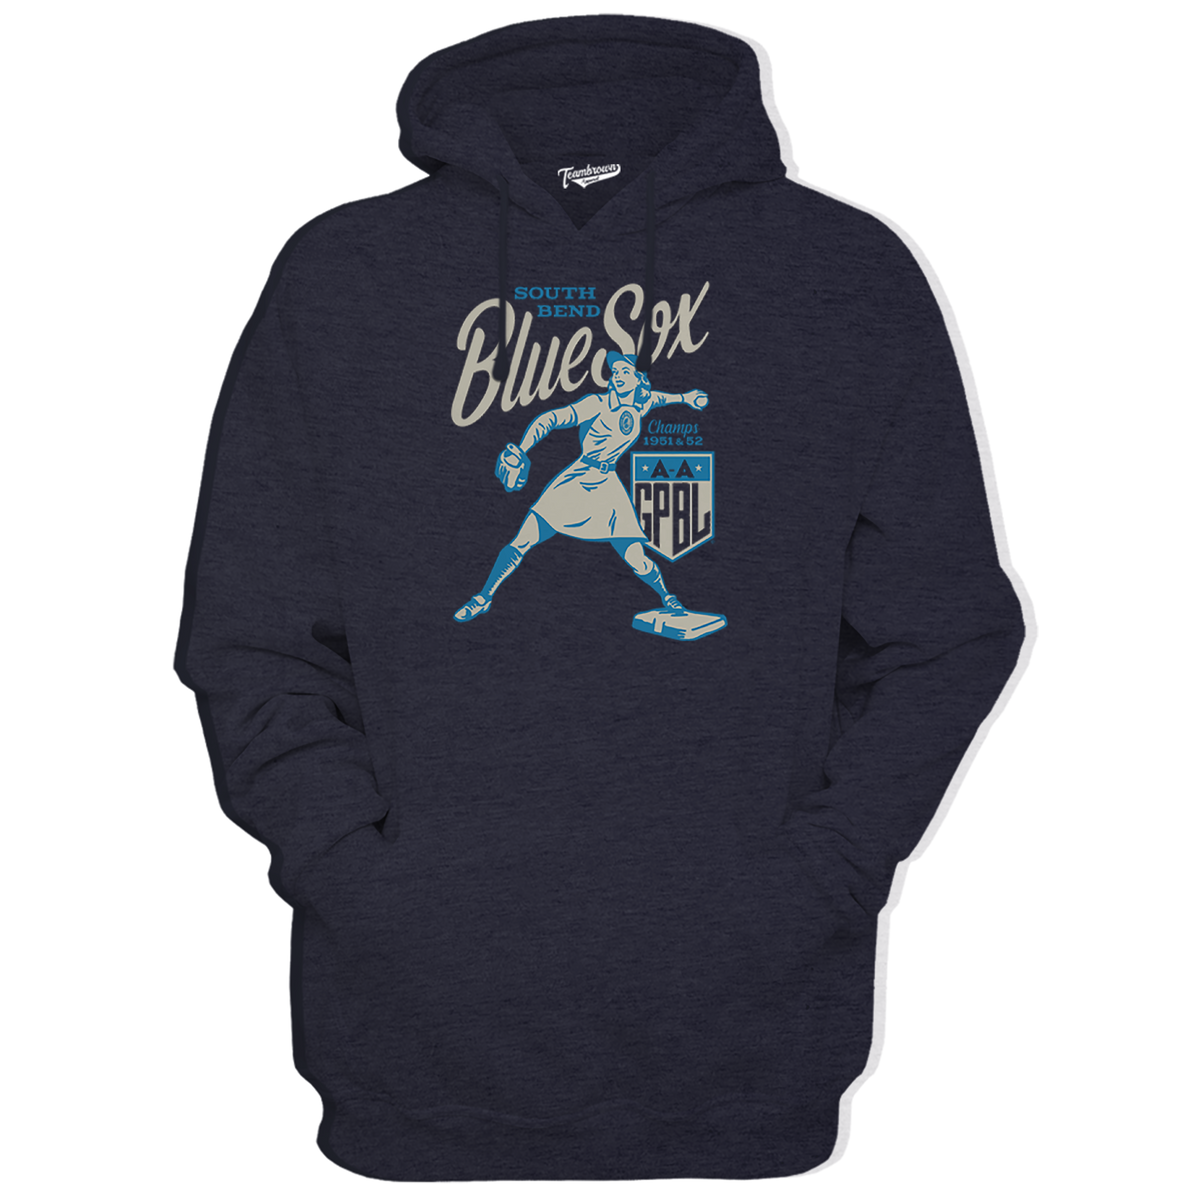 Diamond - South Bend Blue Sox Unisex Premium Hoodie | Officially Licensed - AAGPBL